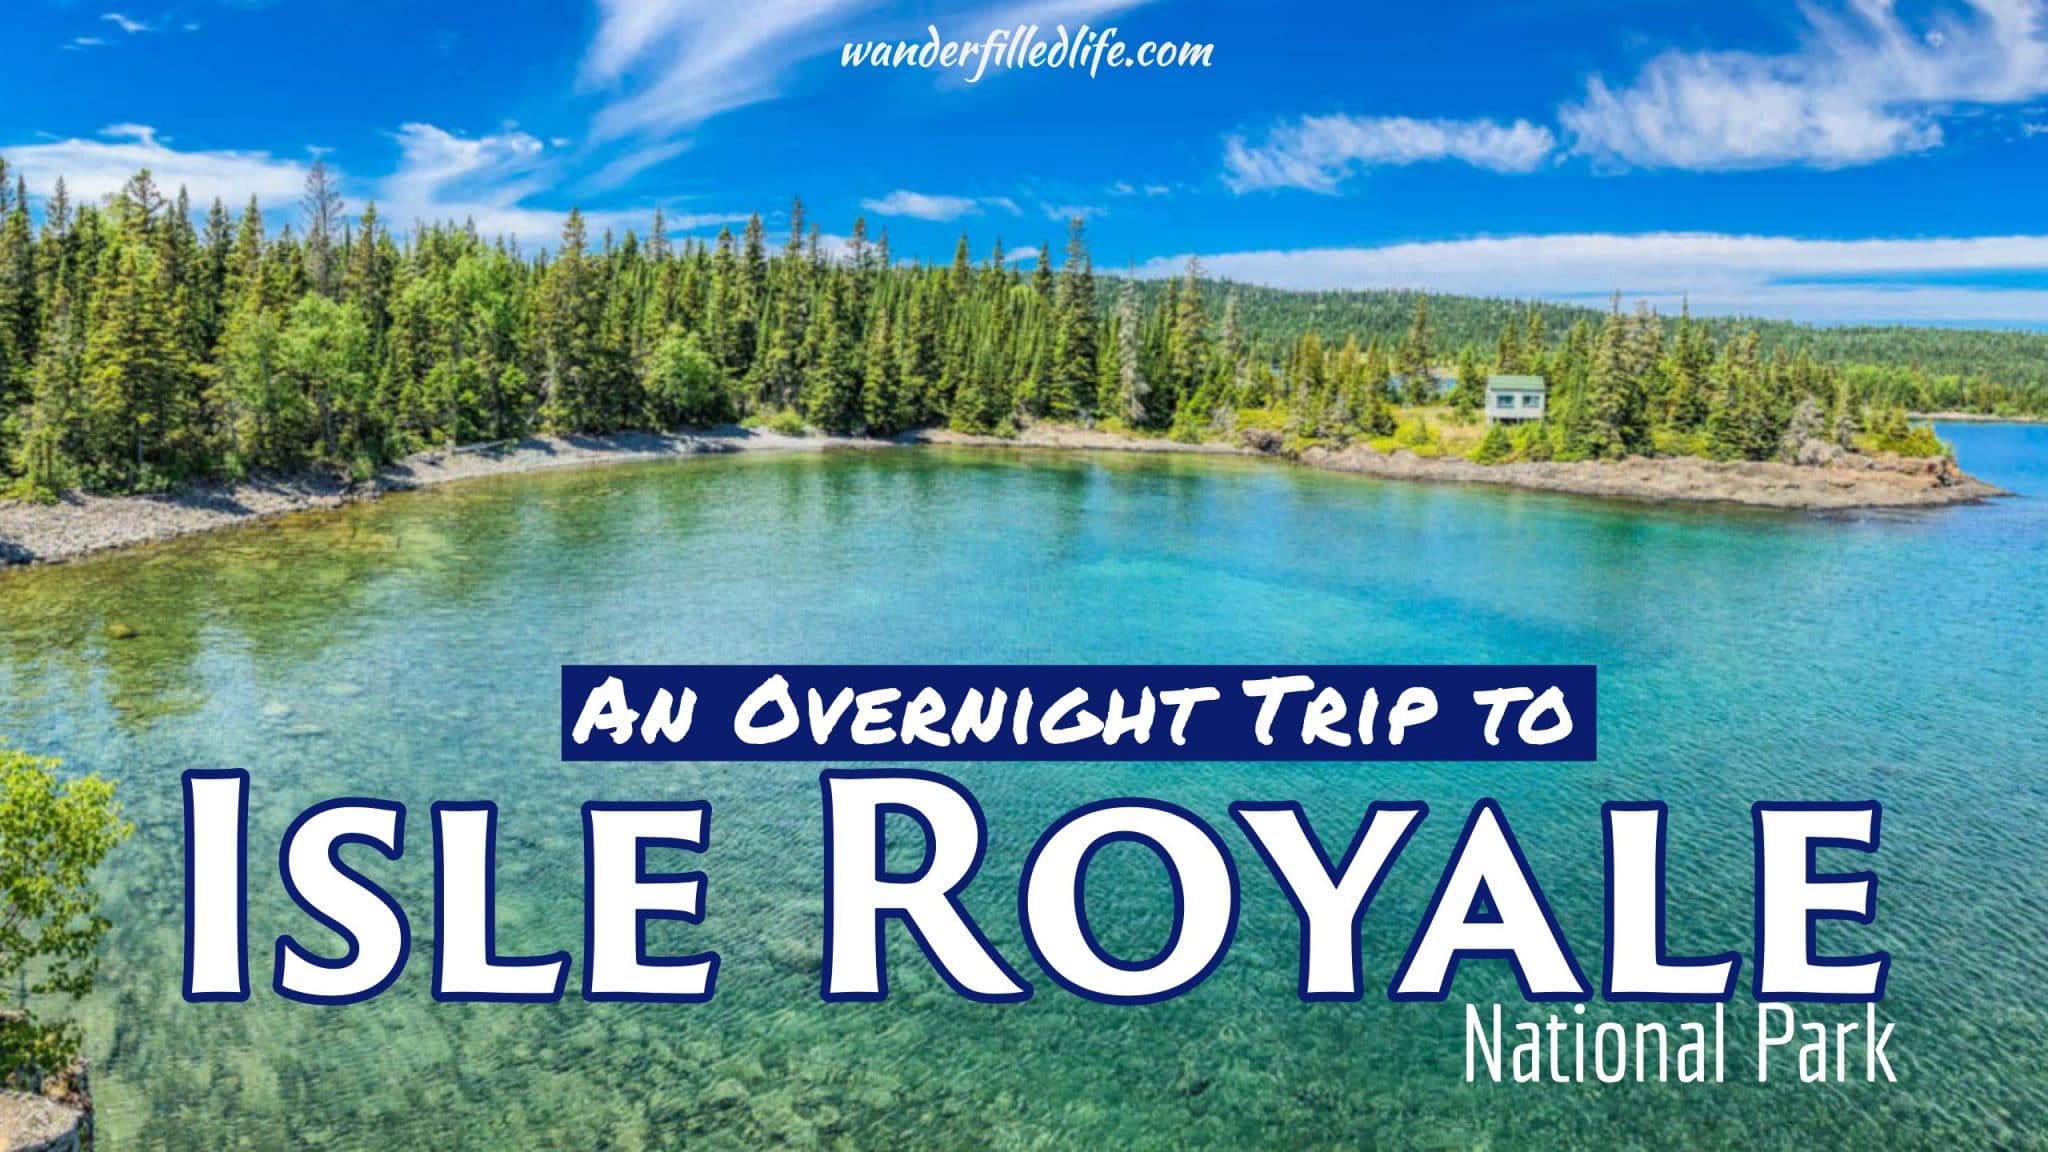 An Overnight Trip to Isle Royale National Park